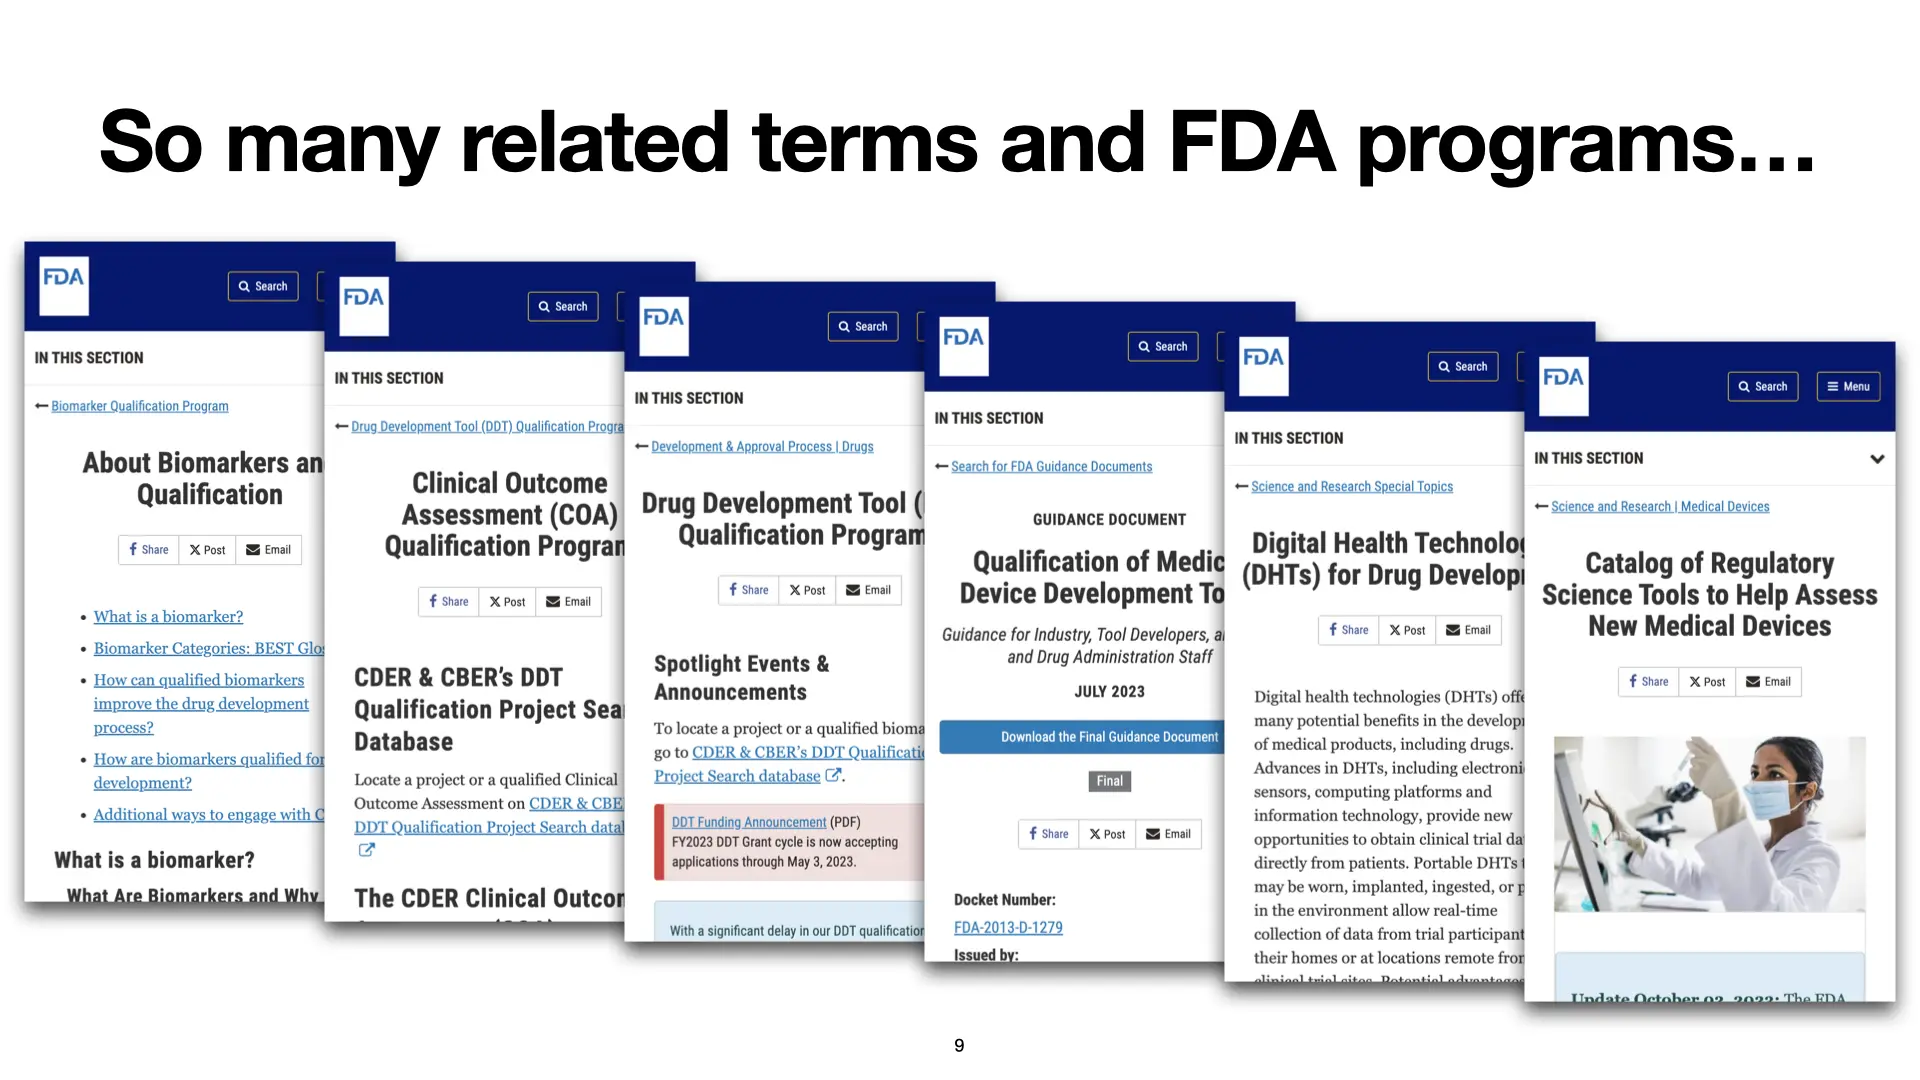 Slide 9: So many related terms and programs... This slide shows screenshots of the FDA website, including webpages related to Biomarkers, Clinical Outcome Assessments, Drug Development Tools, Medical Device Development Tools, Digital Health Technologies for Drug Development, and Regulatory Science Tools to Help Assess New Medical Devices. Each webpage shown on this slide is linked in the text below.